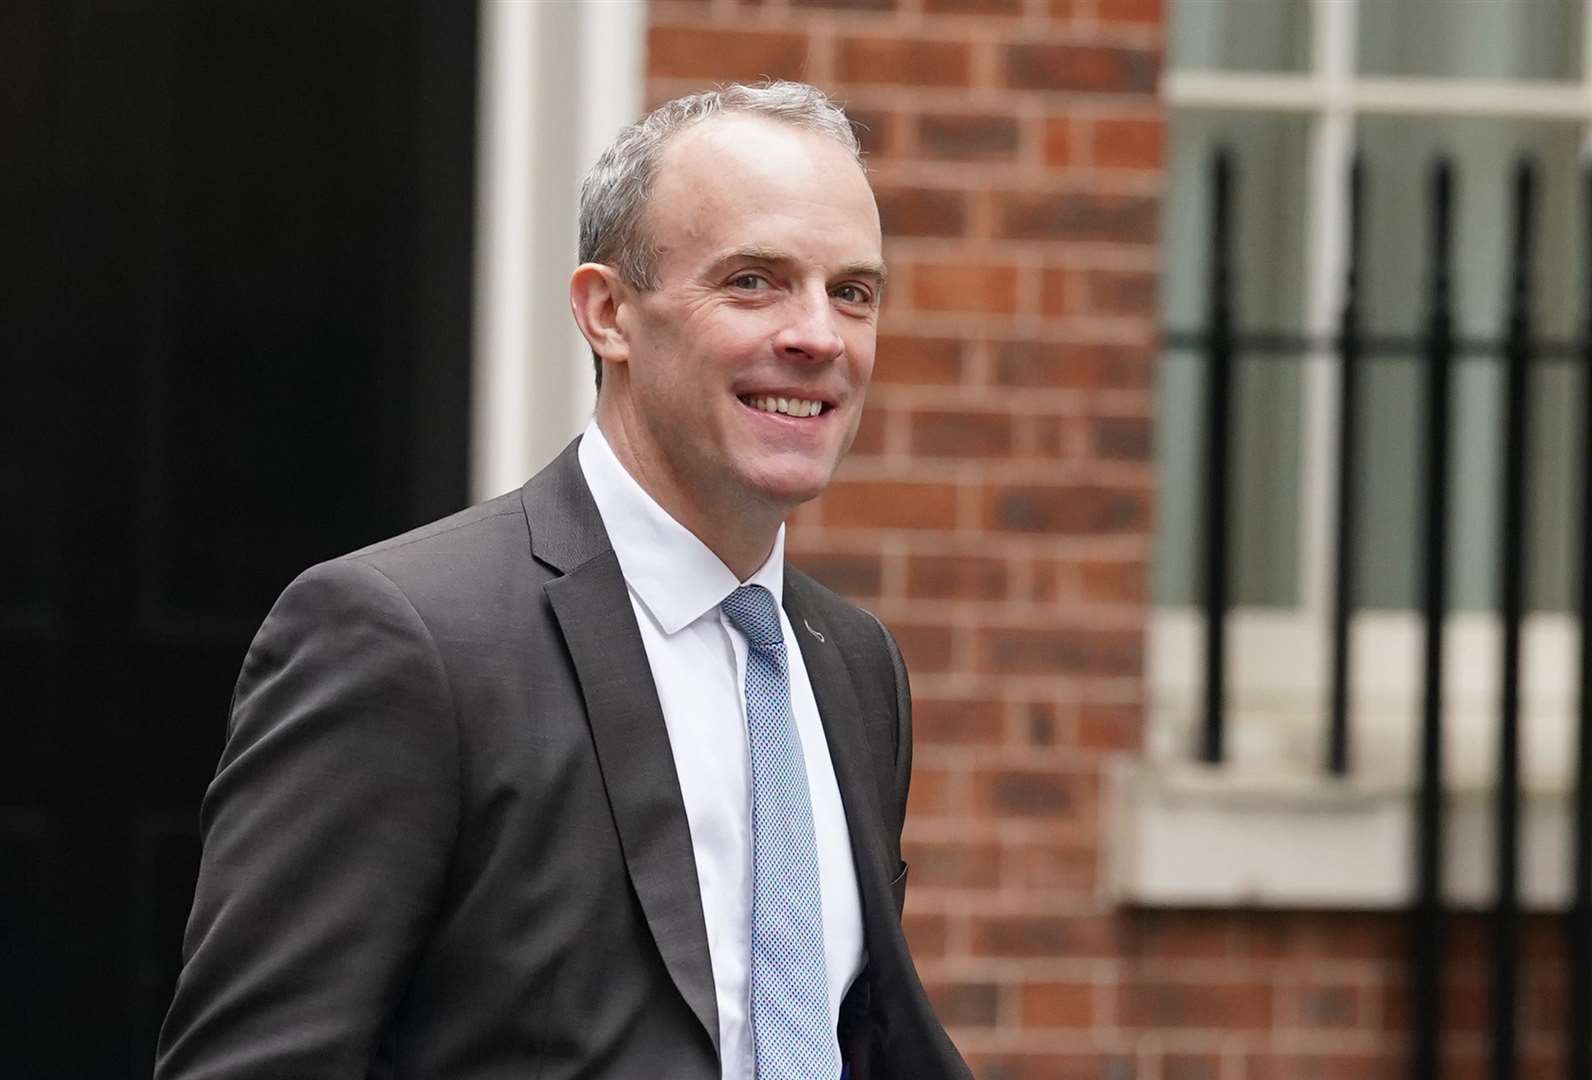 Mr Raab has denied bullying and insisted he ‘behaved professionally throughout’ (Gareth Fuller/PA)